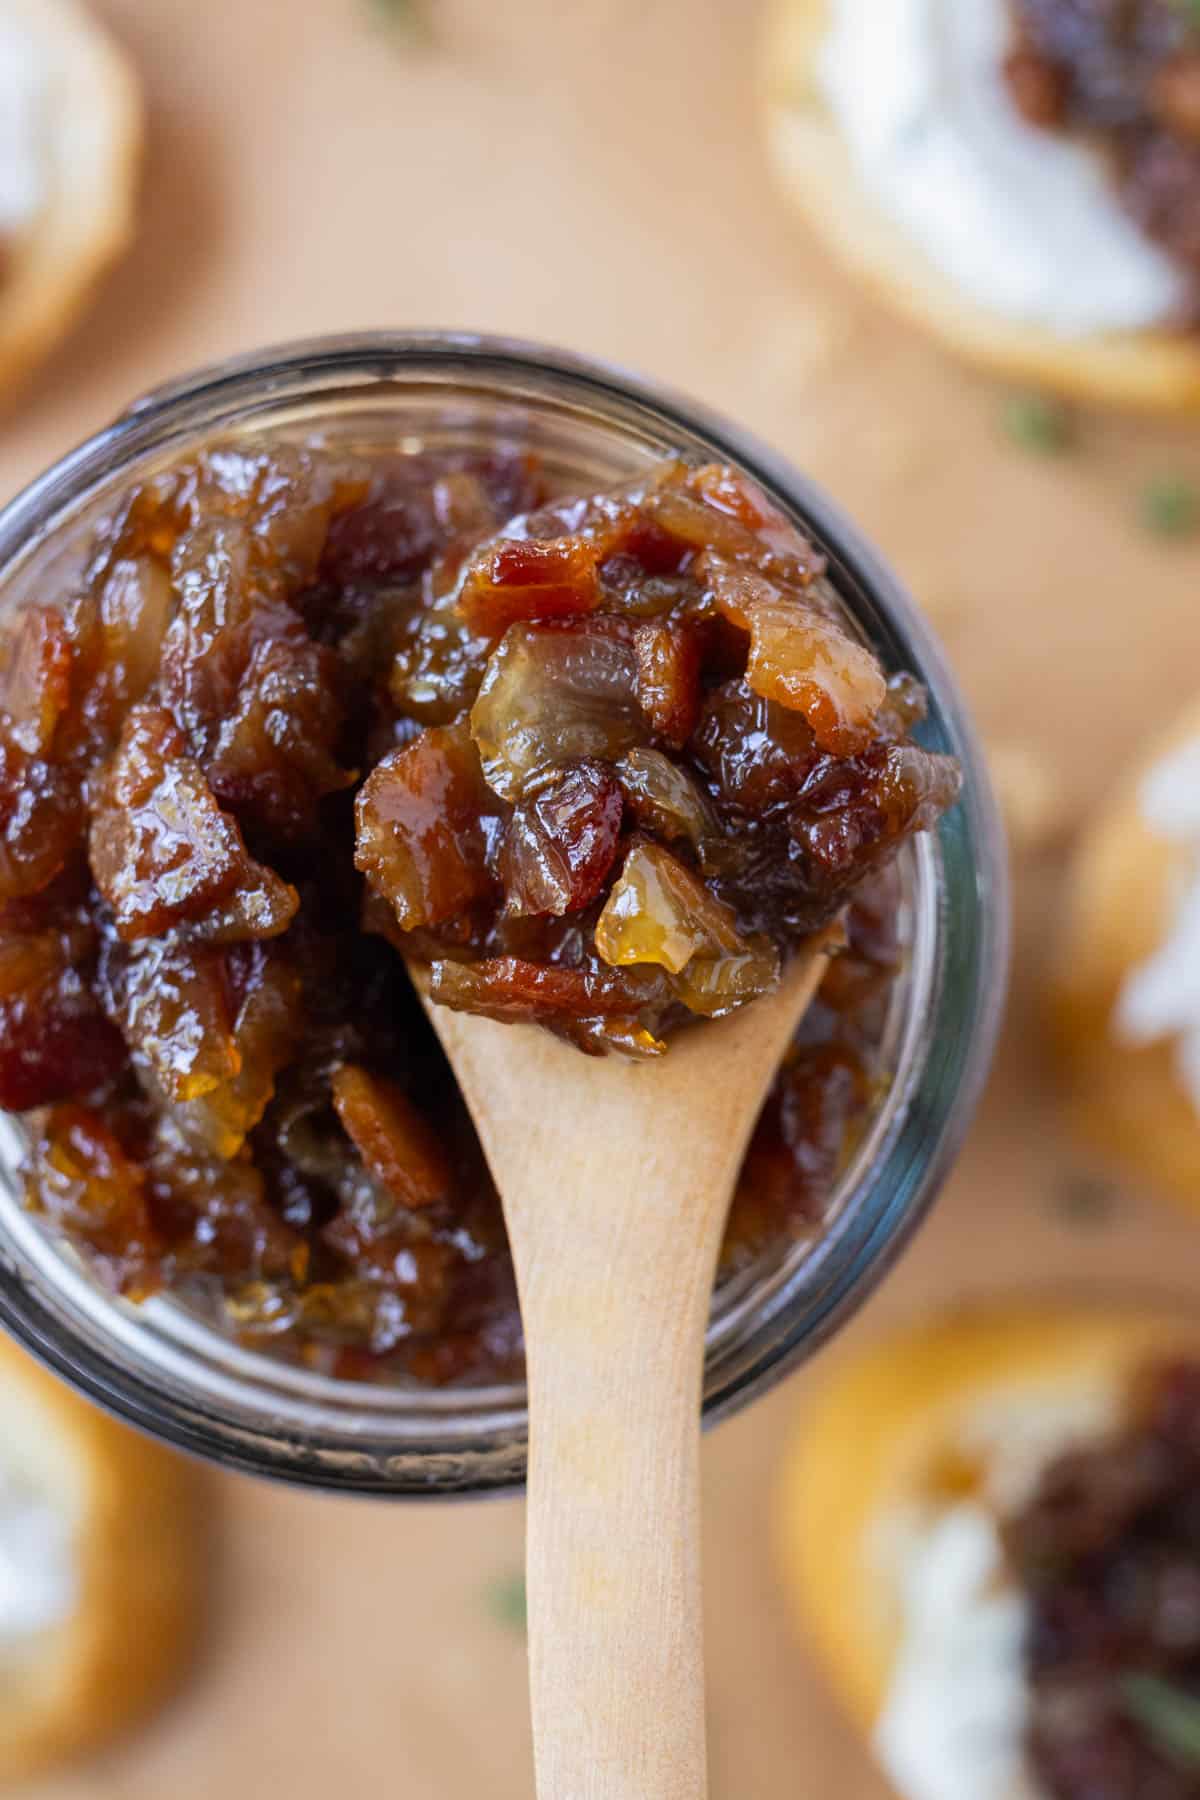 A wooden spoons scoops up some bacon onion jam from a glass jar.